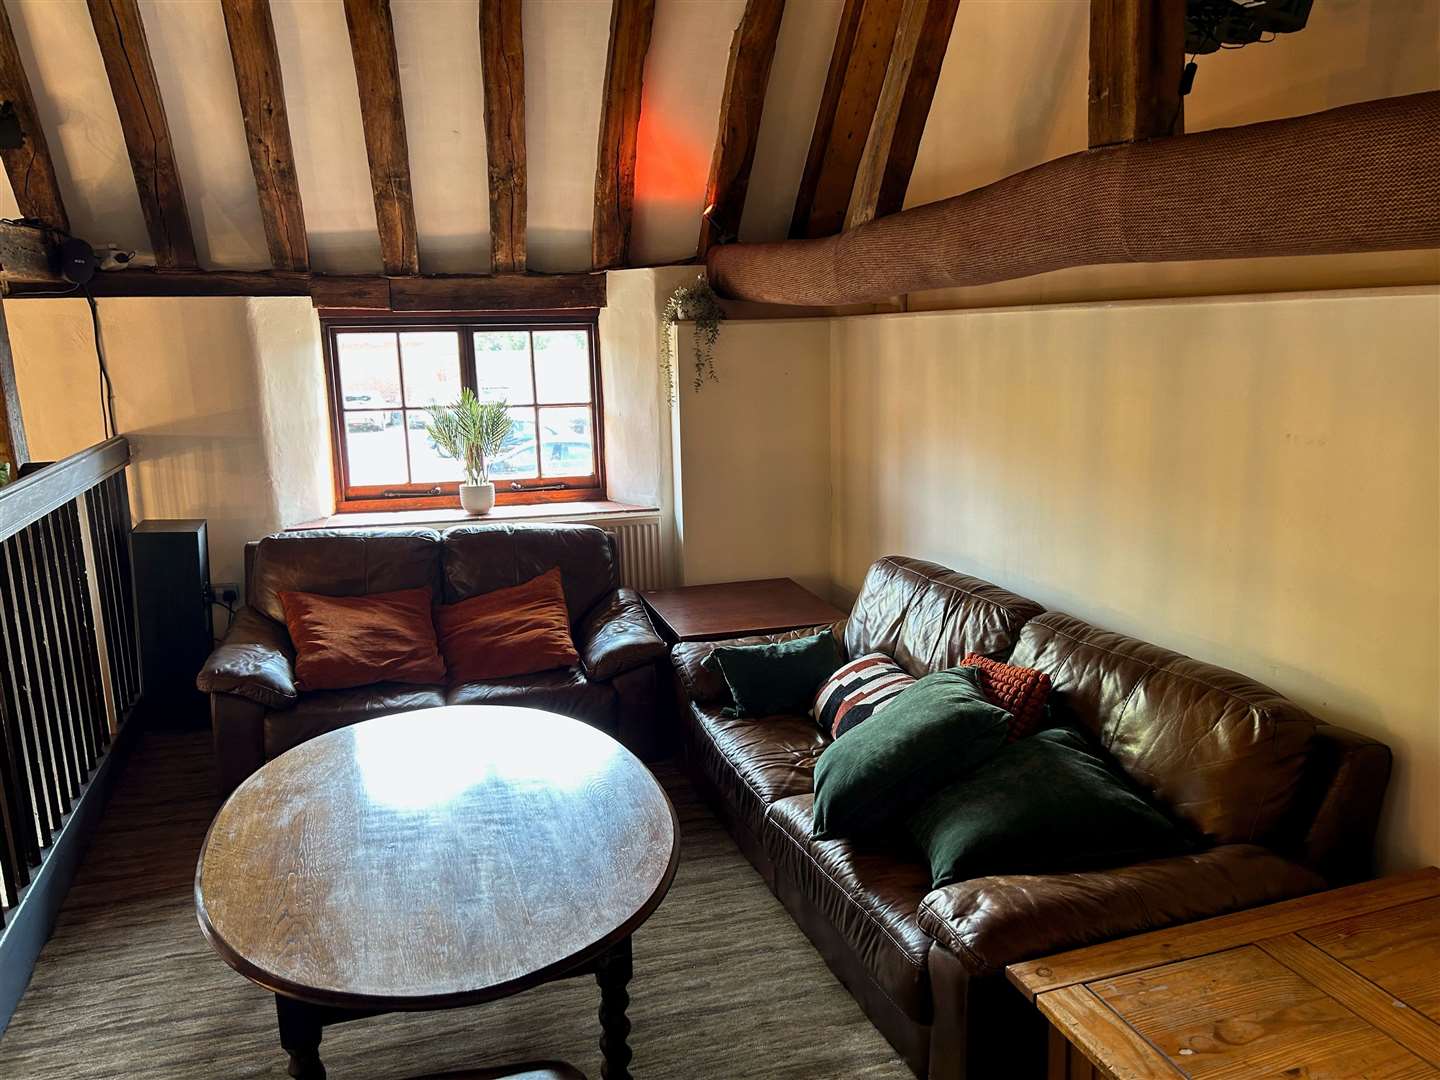 The upstairs lounge area - with extremely comfortable sofas